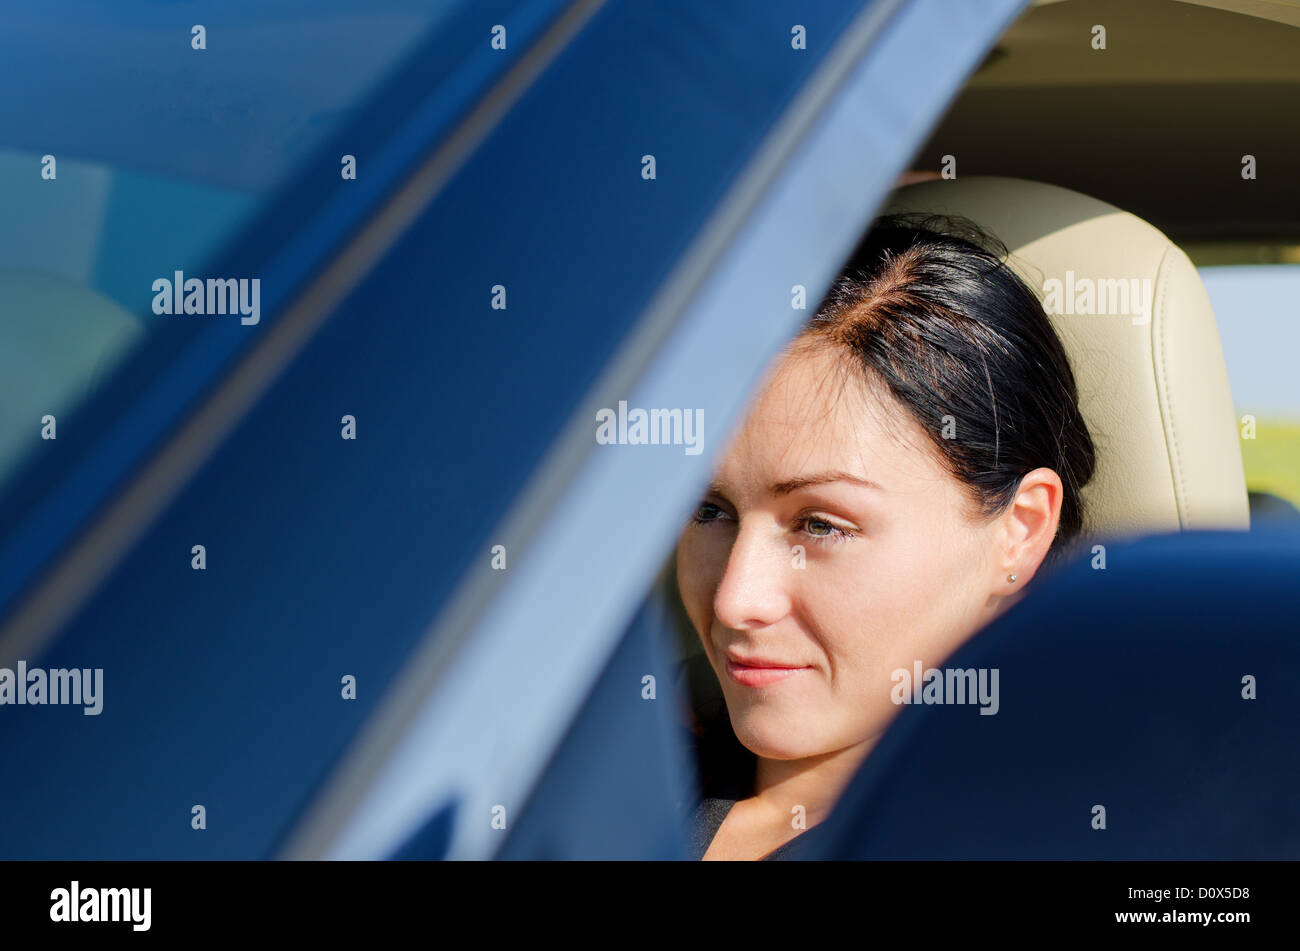 View through the window of a beautiful woman sitting in a car with her head resting on the headrest Stock Photo